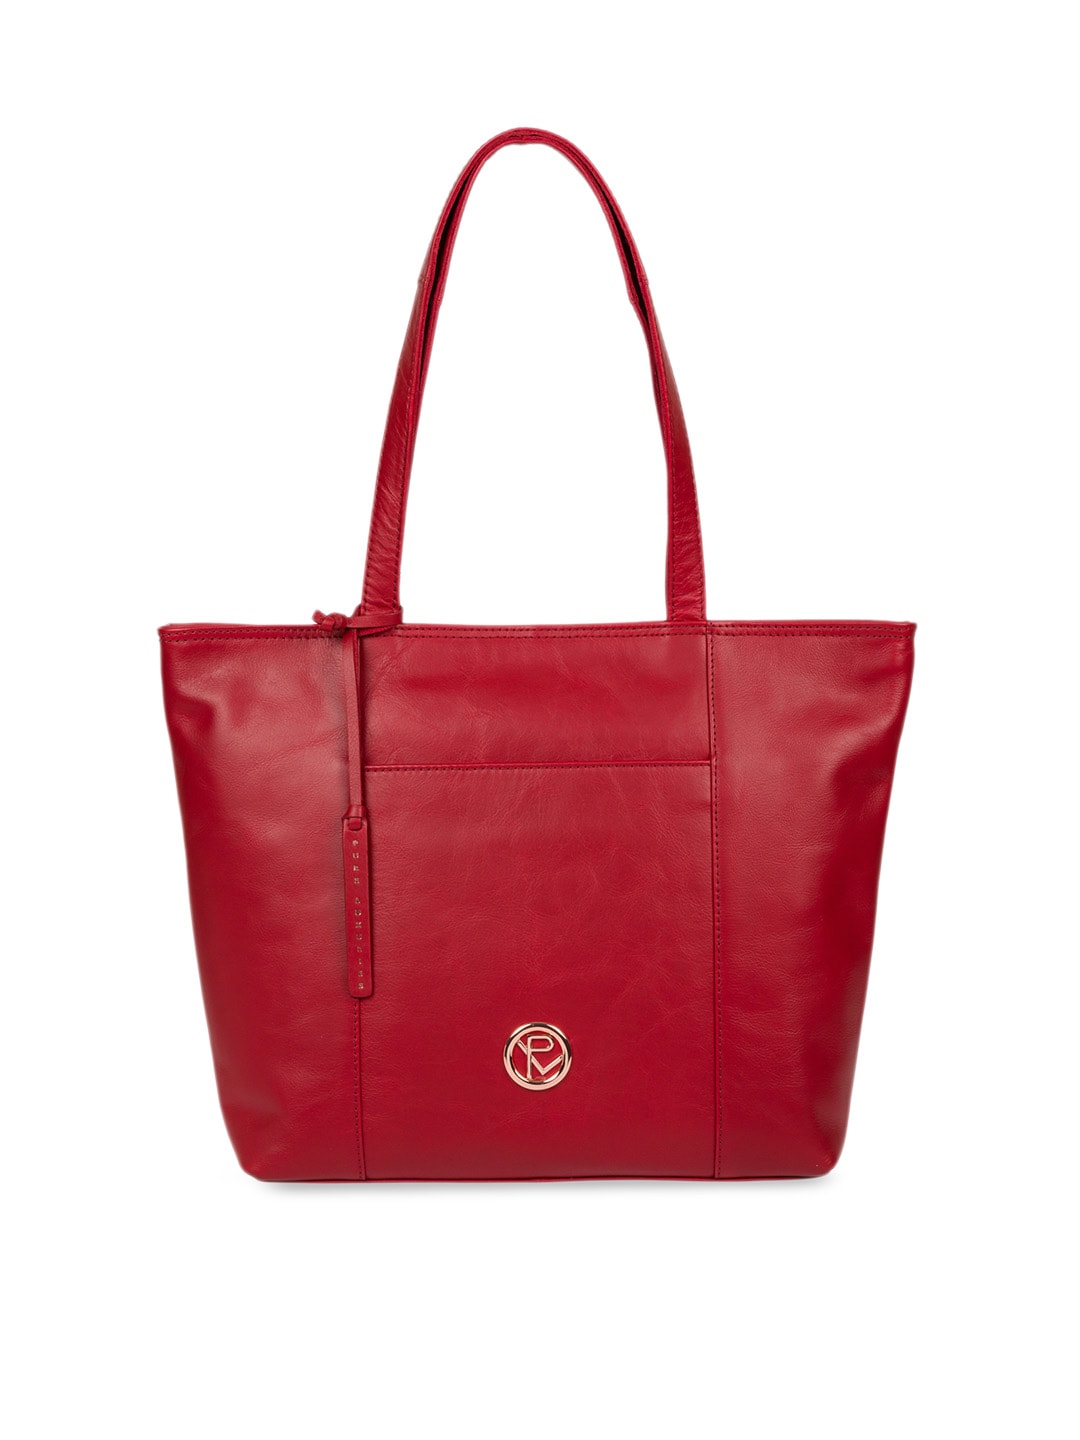 PURE LUXURIES LONDON Red Solid Genuine Leather Pimm Shoulder Bag Price in India